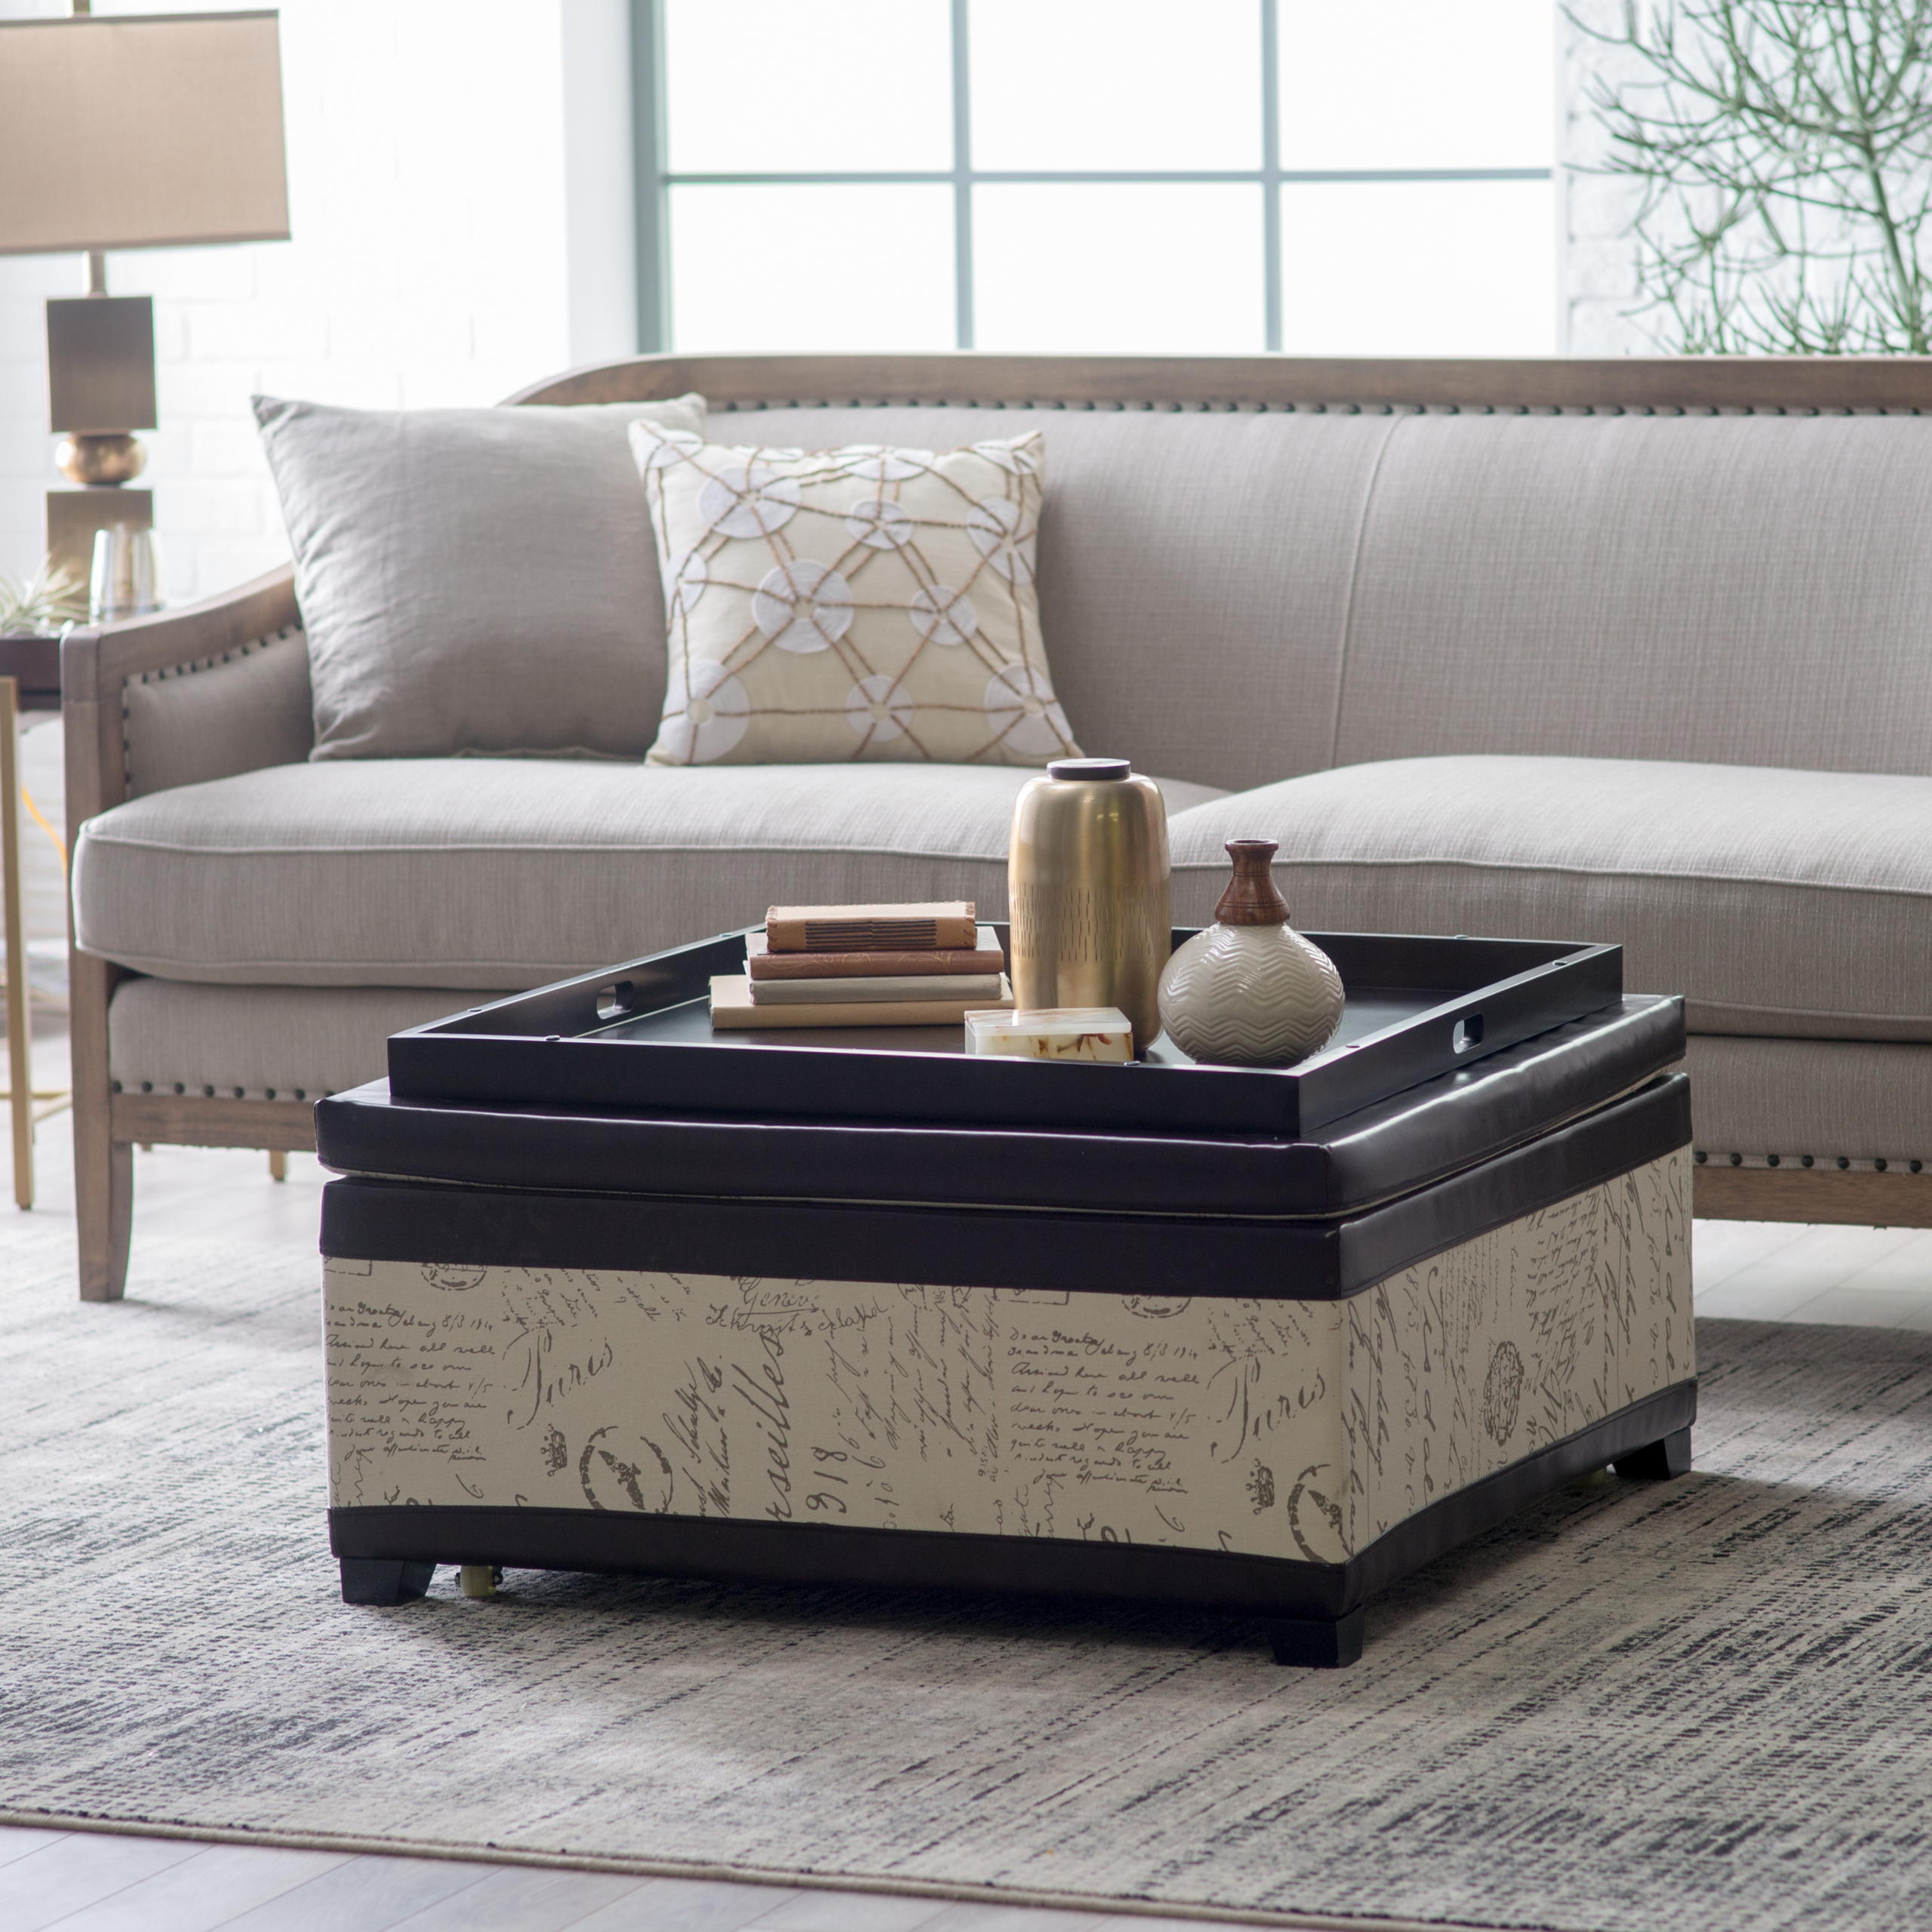 Square Leather Ottoman Coffee Table, Square Leather Ottoman With Storage